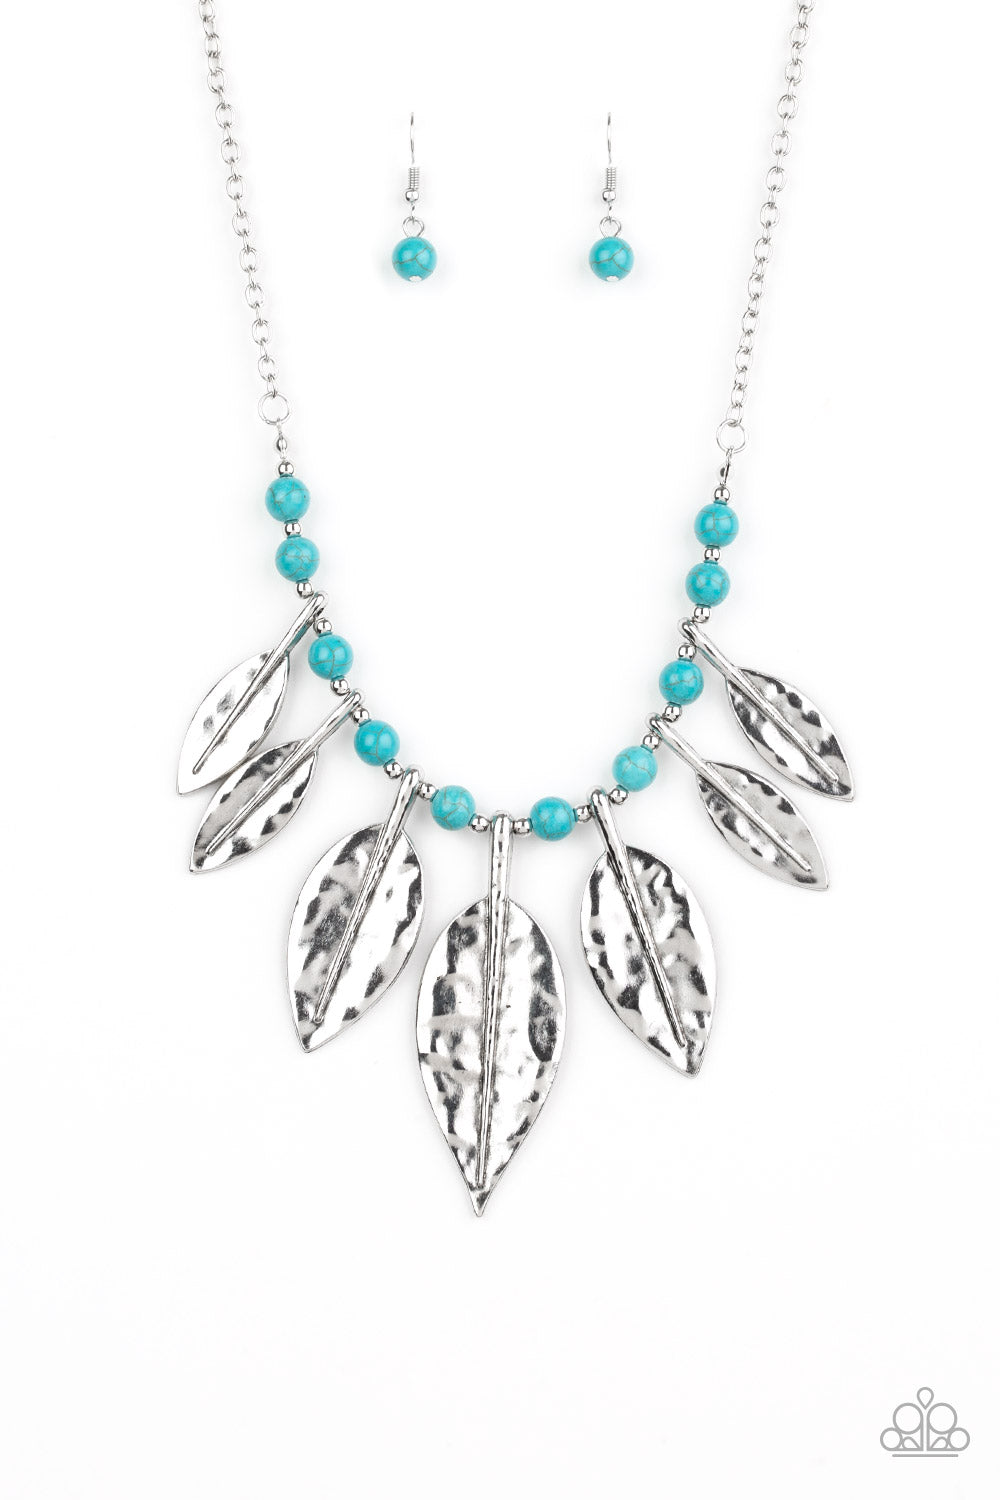 Paparazzi Accessories - Highland Harvester - Blue Necklace